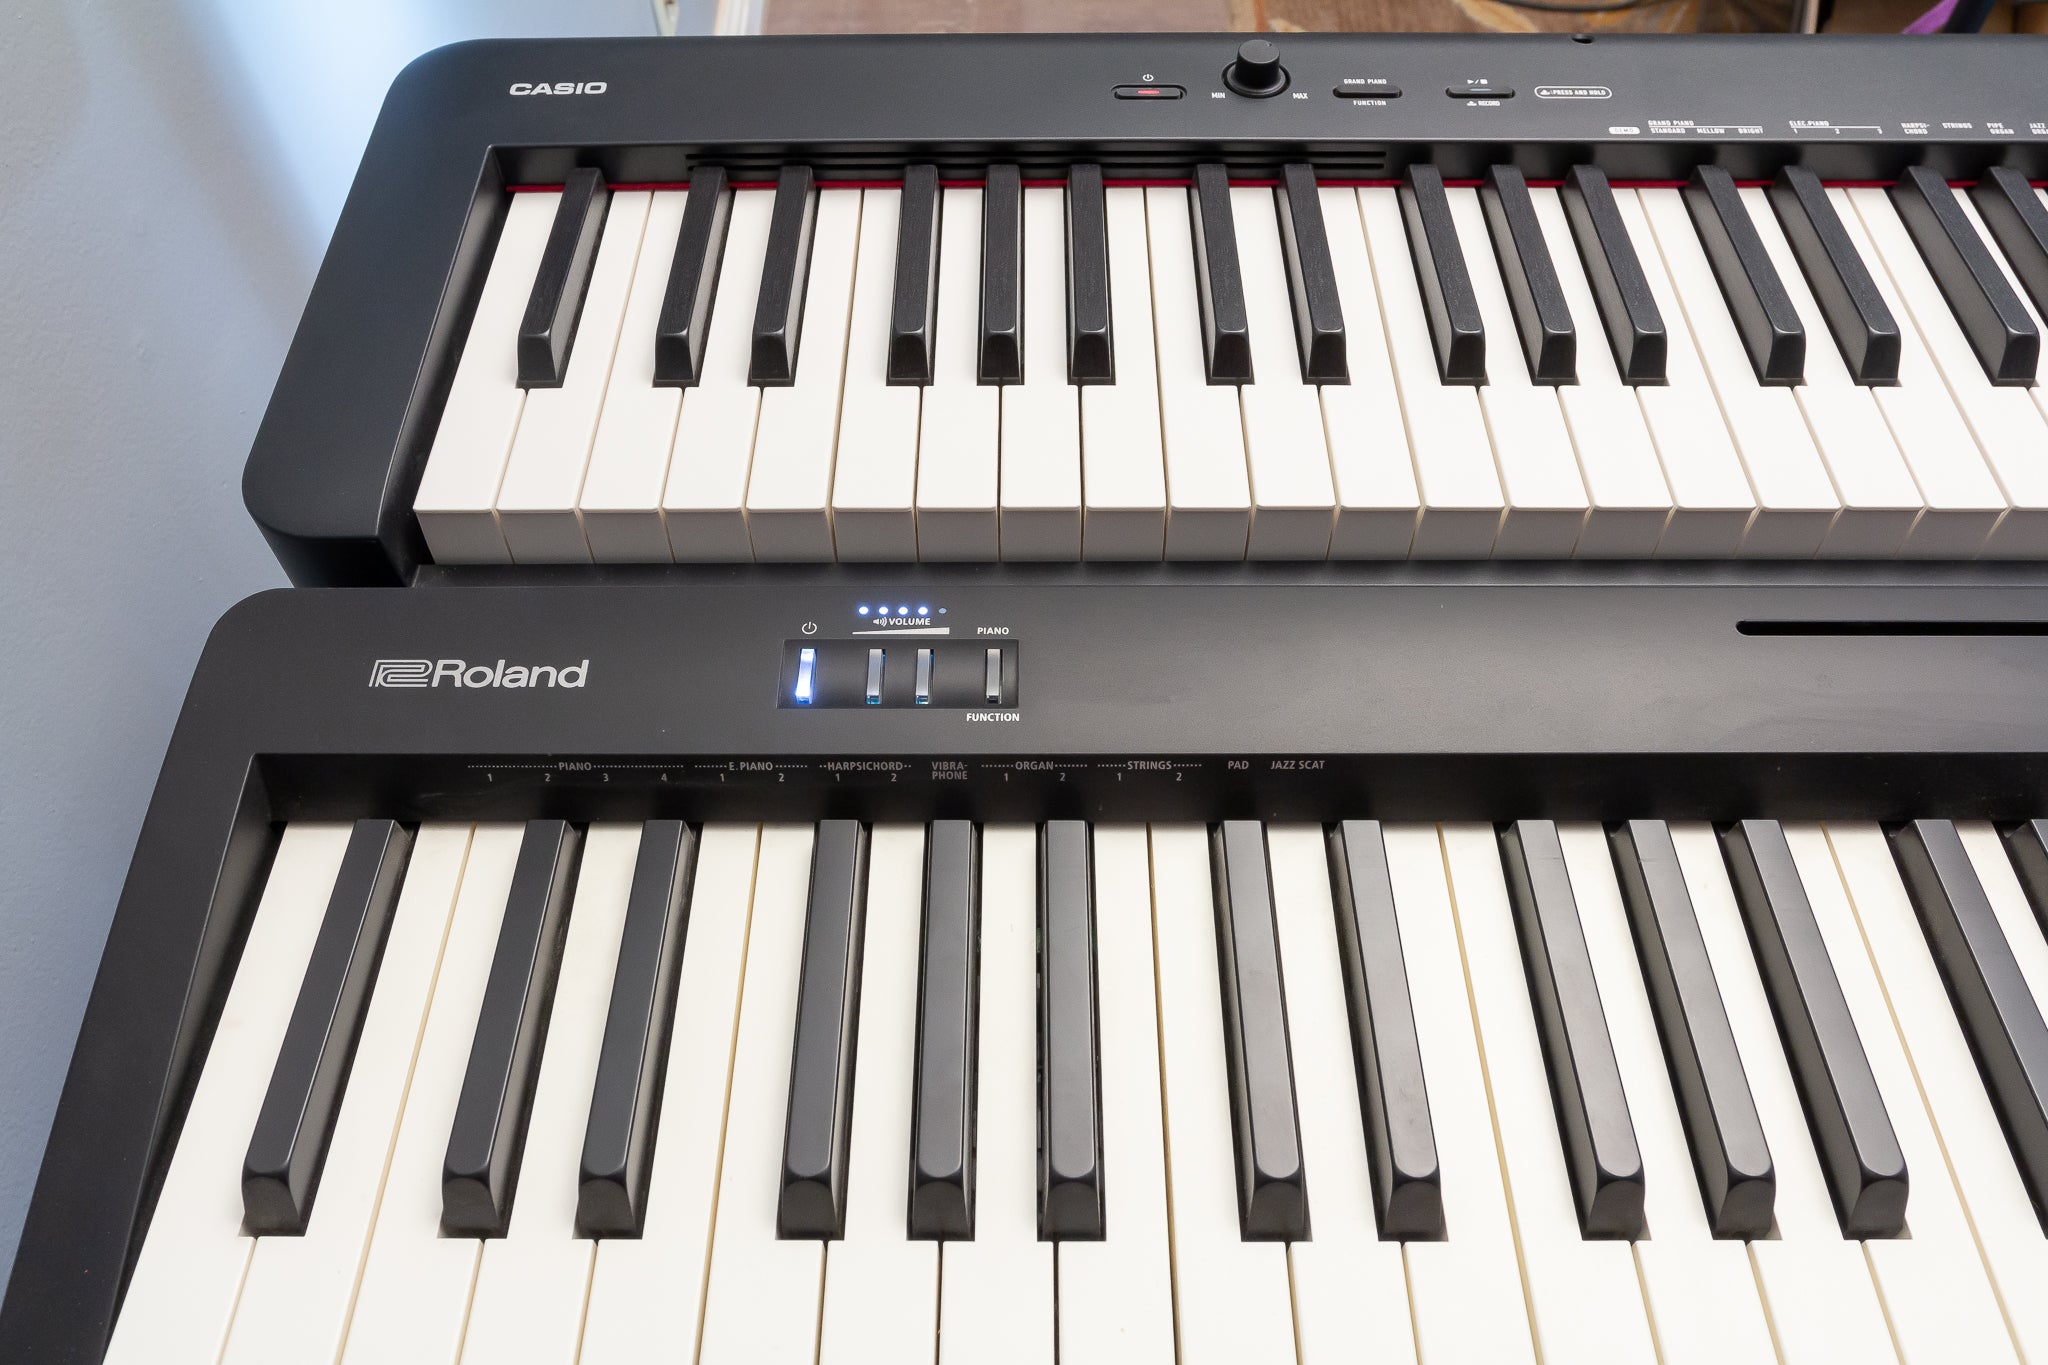 Digital Pianos for Sale: A Guide to Buying Your First Keyboard